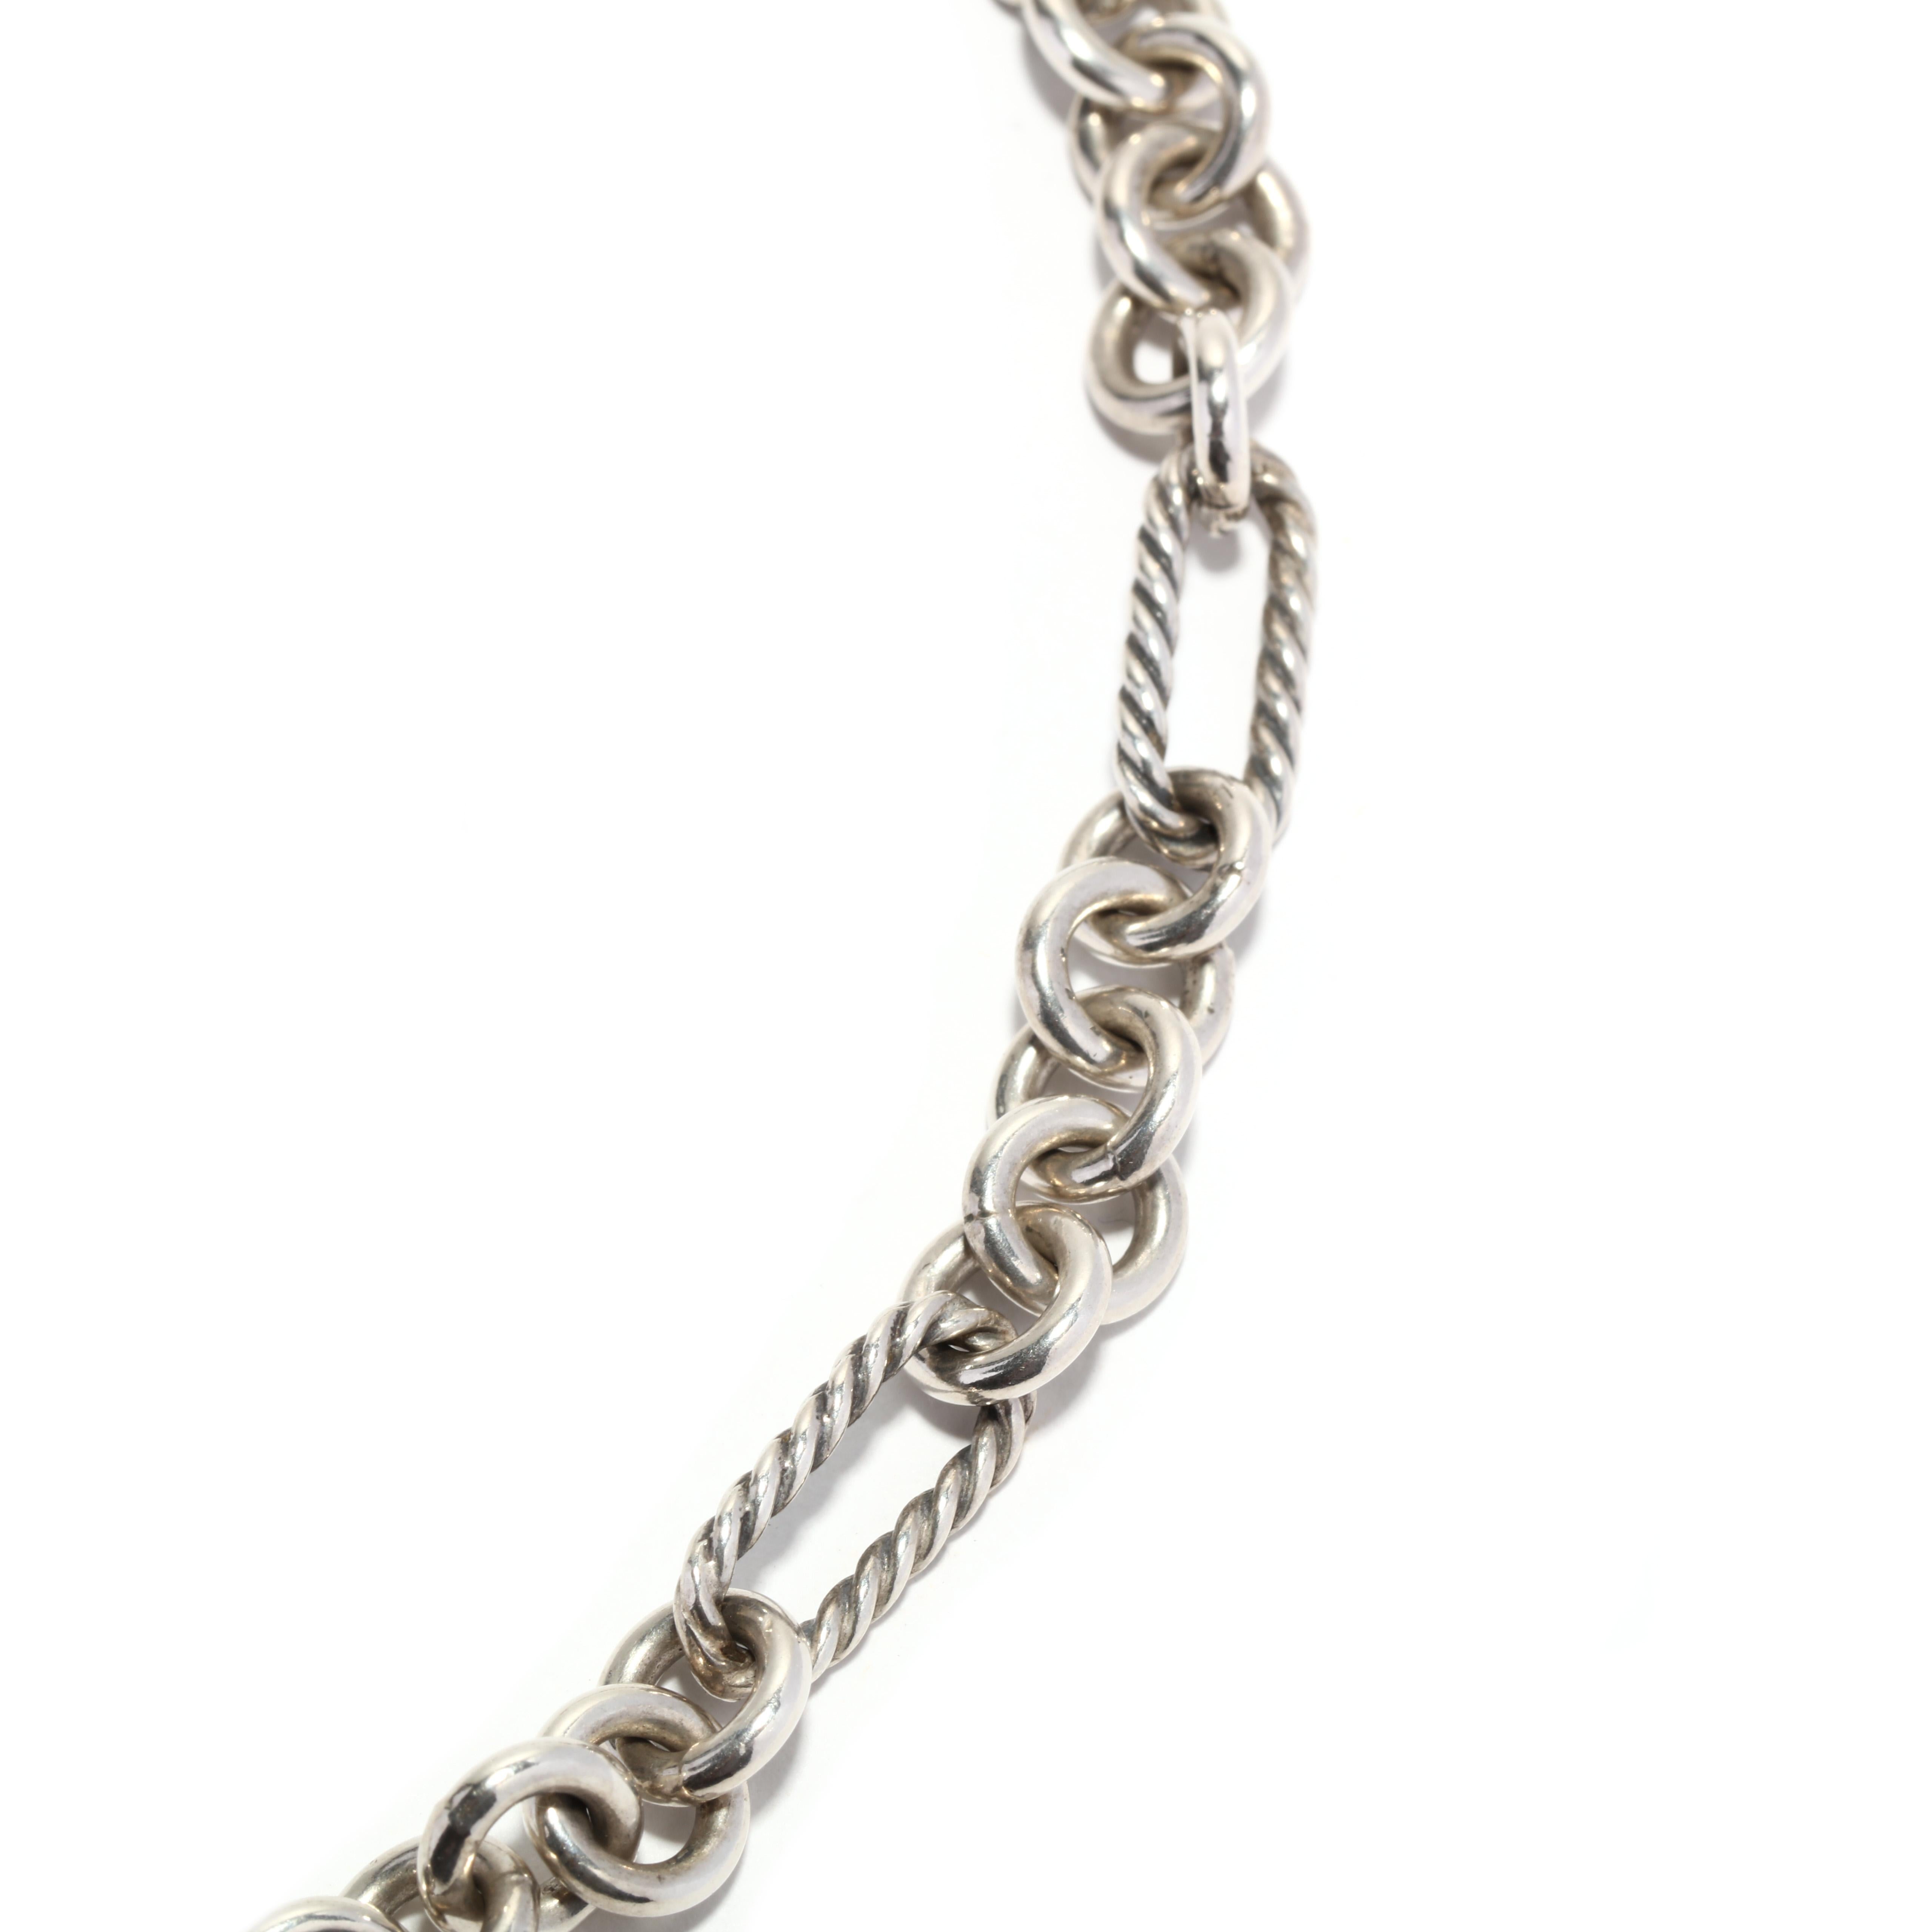 This David Yurman oval round link toggle chain necklace is a luxurious and elegant piece that will add a touch of sophistication to any outfit. Made with 18K yellow gold and sterling silver, this necklace is perfect for those who love the